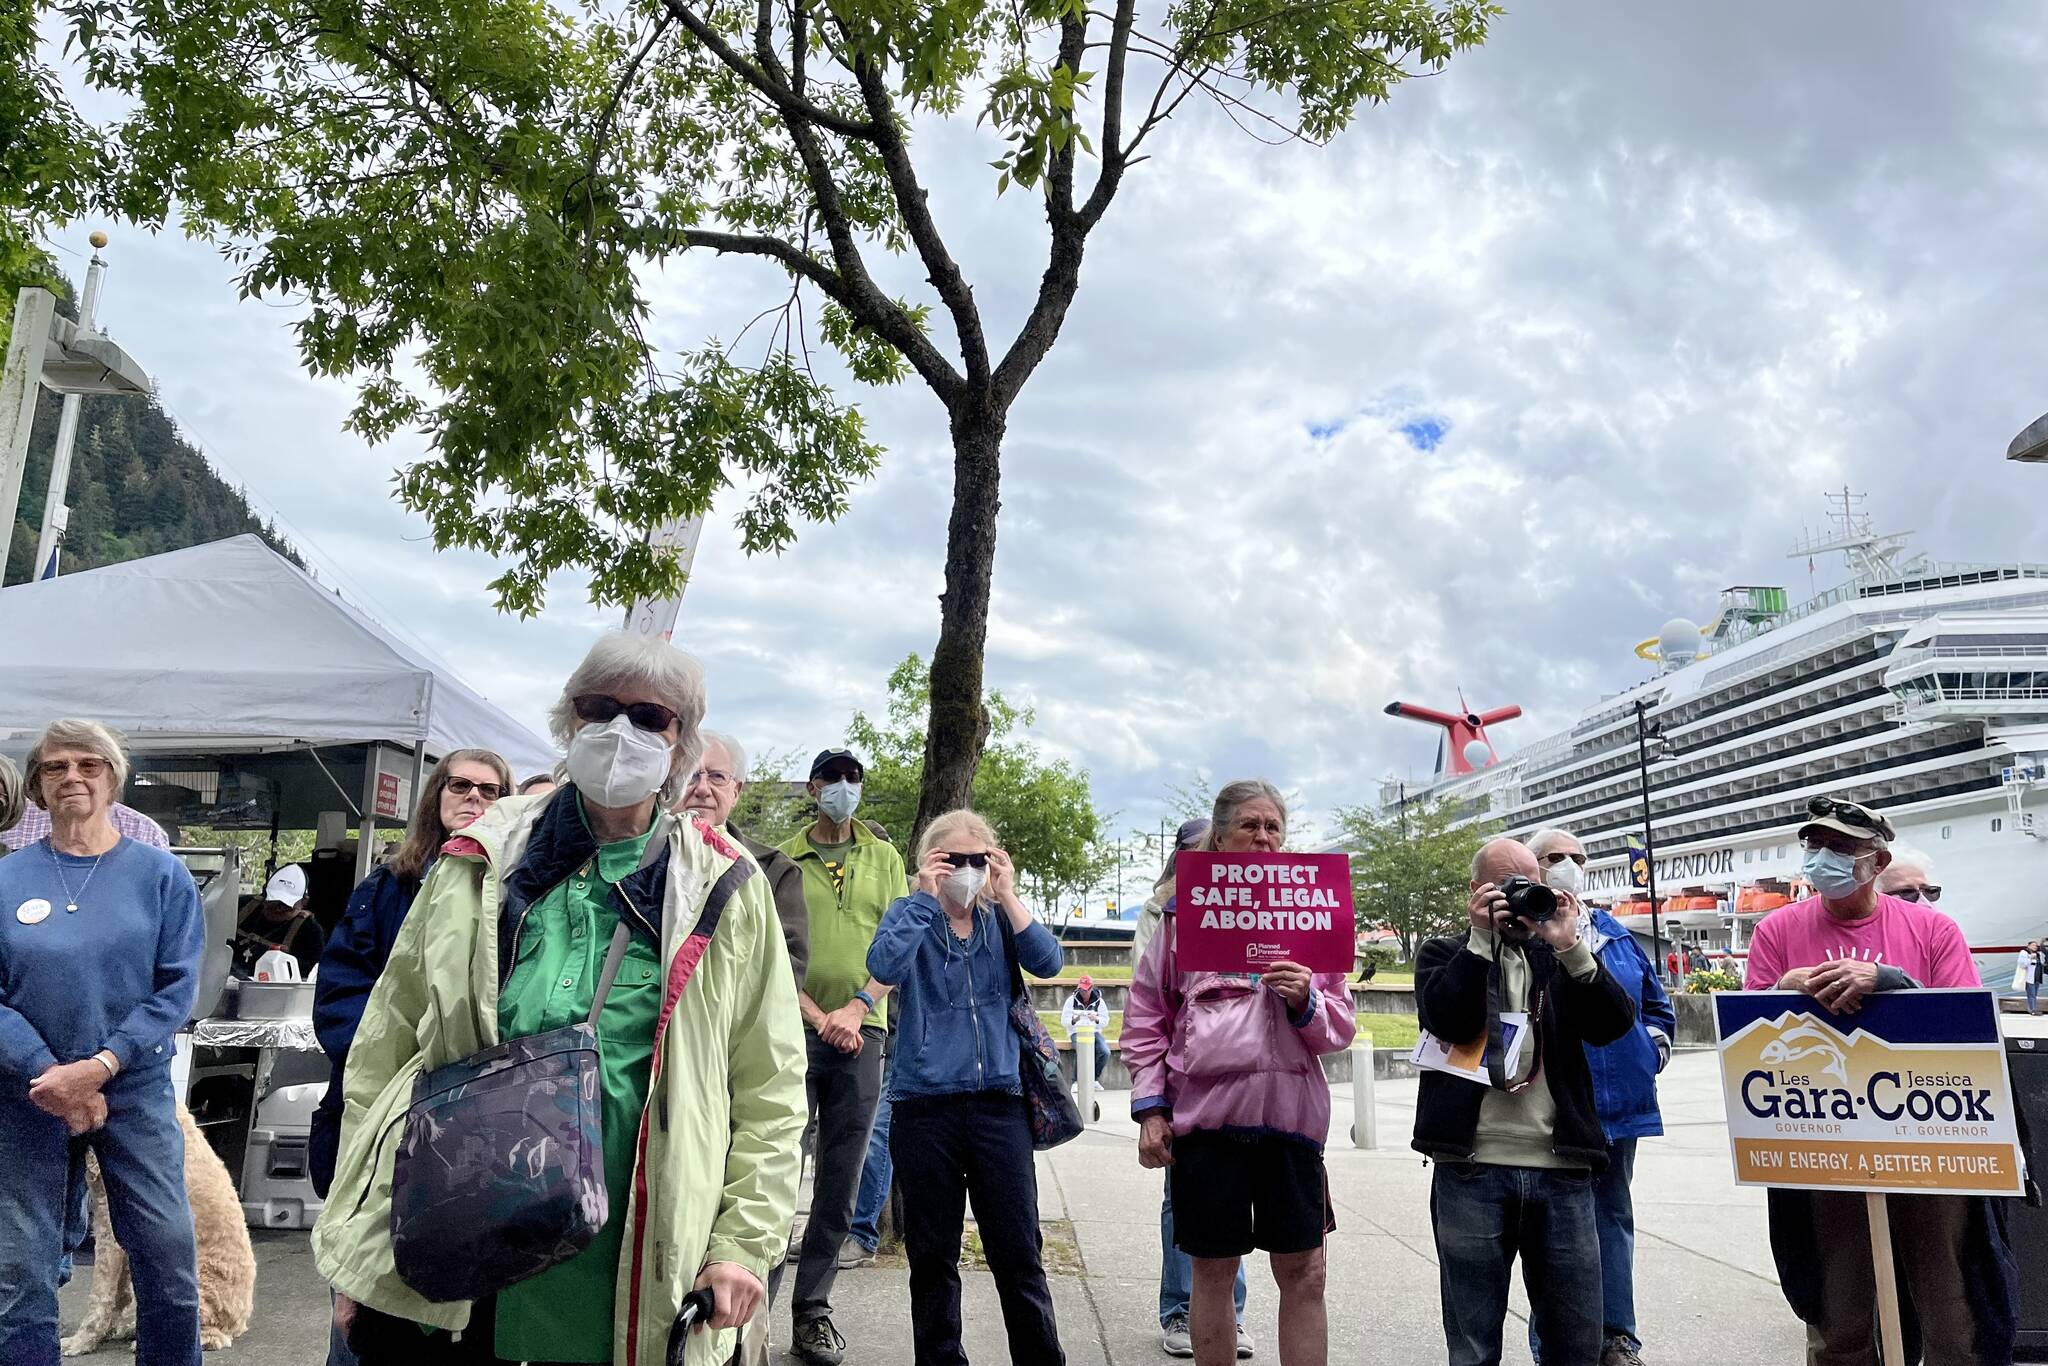 Crowd attending Saturday’s rally held by Planned Parenthood at Marine Park. (Jonson Kuhn / Juneau Empire)